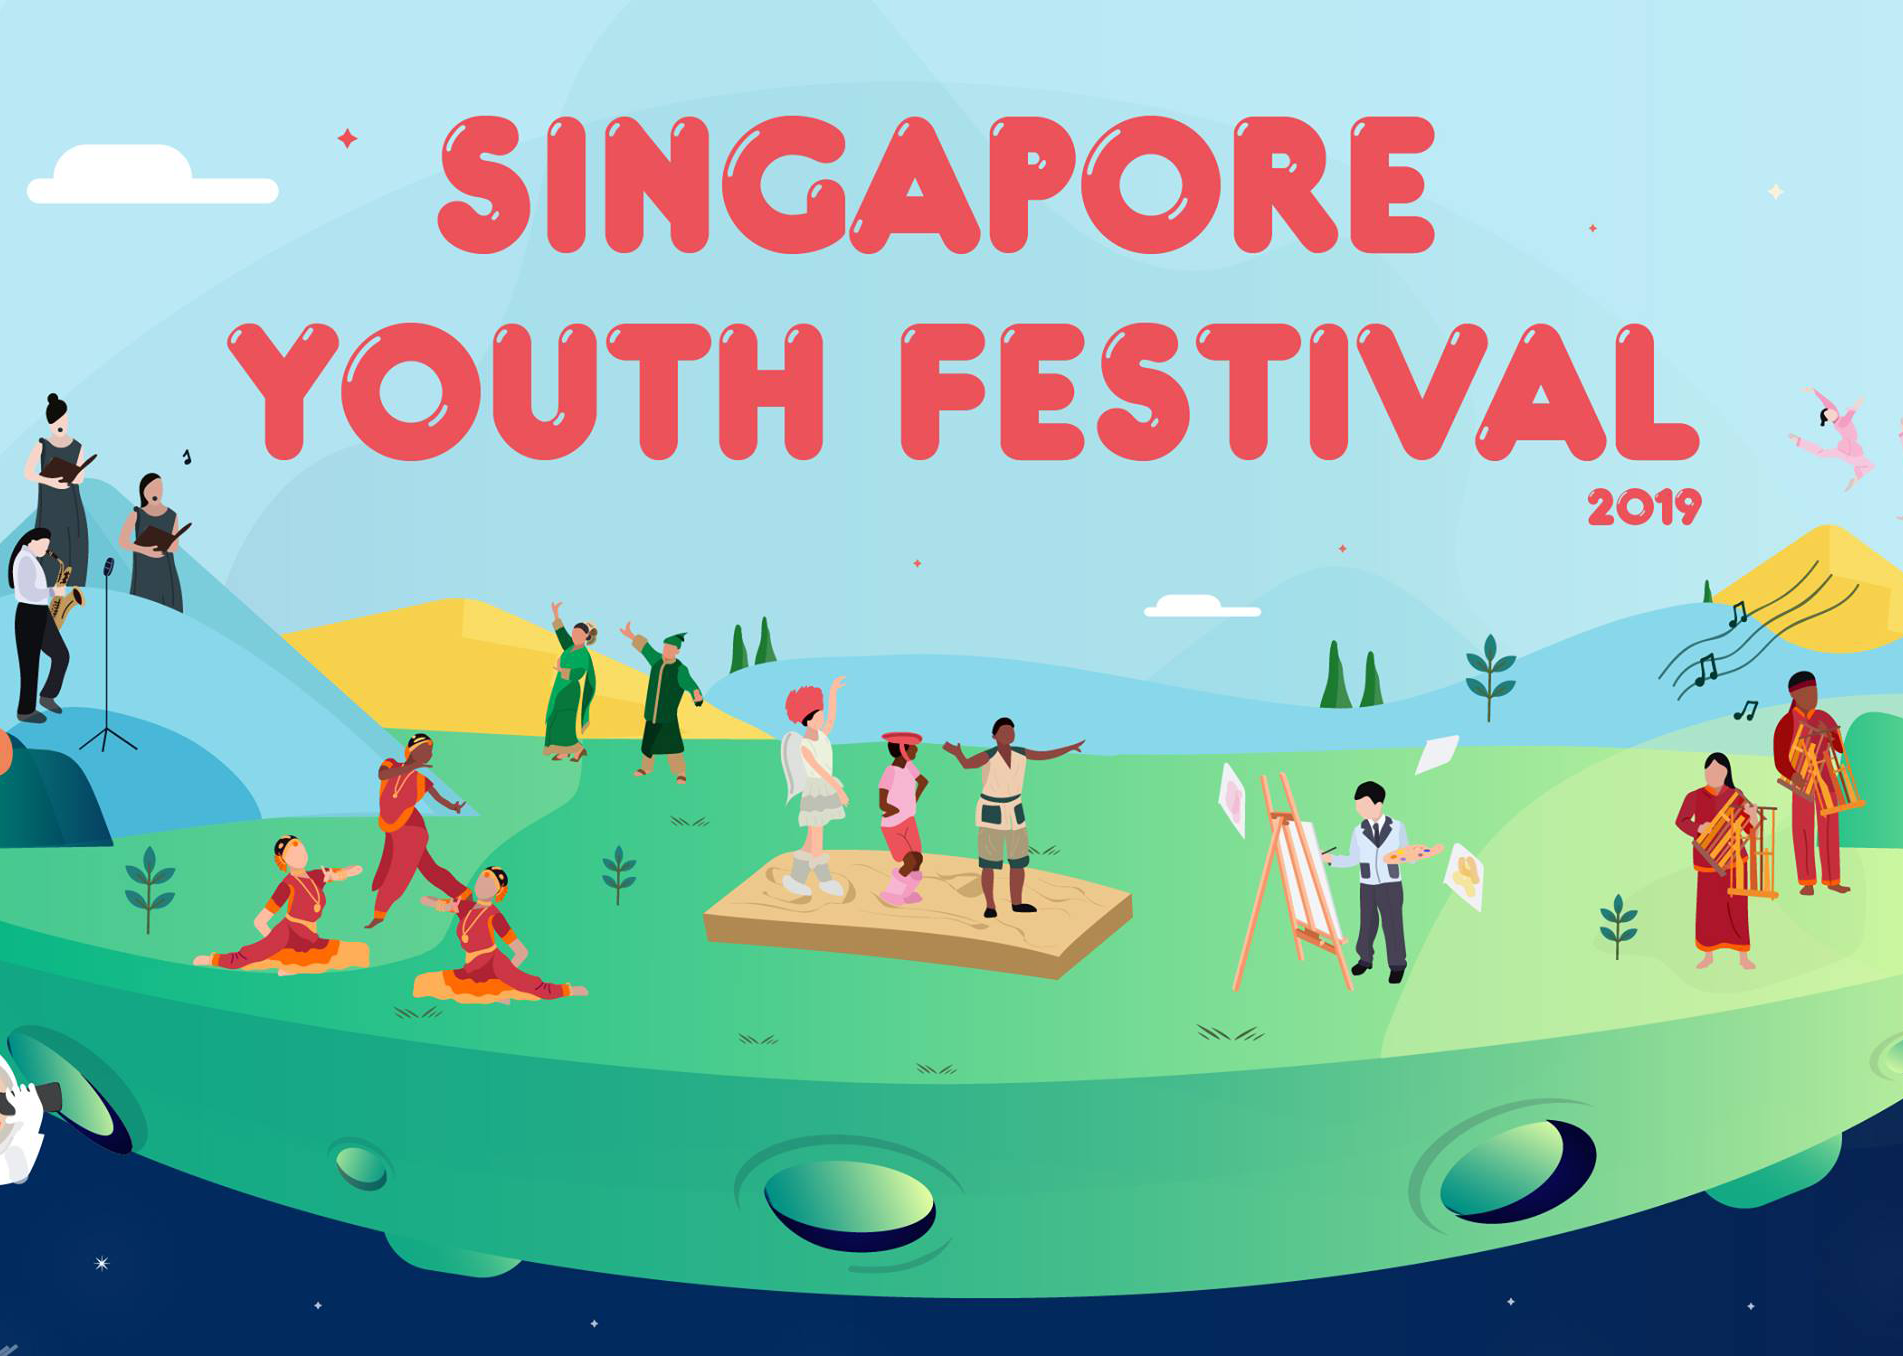 Singapore Youth Festival: A Weekend with the Arts